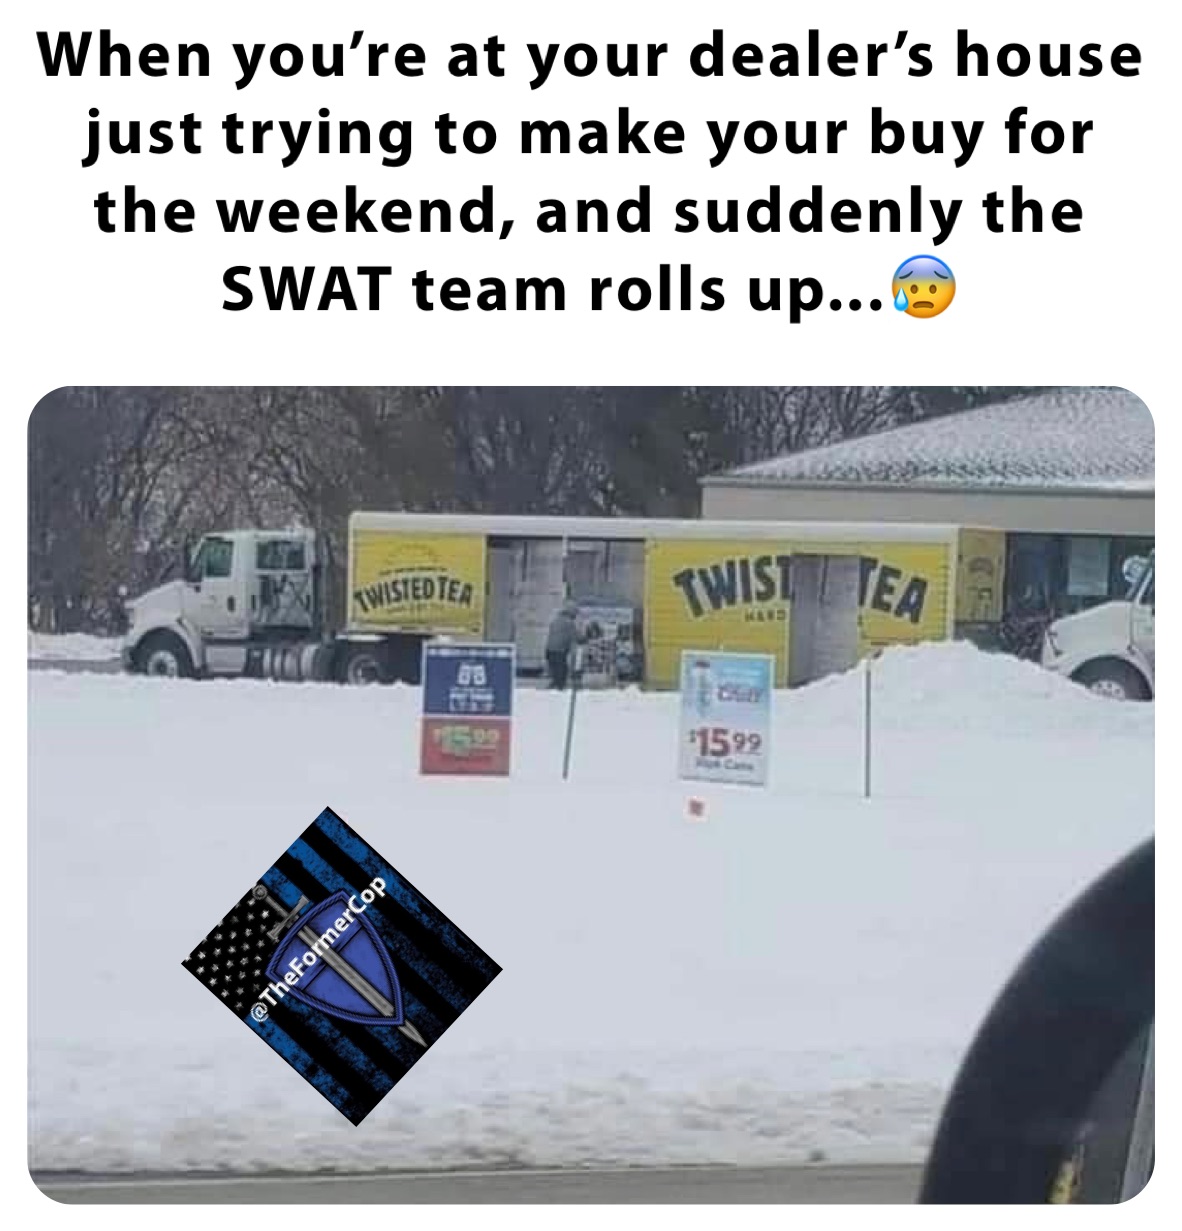 When you’re at your dealer’s house just trying to make your buy for the weekend, and suddenly the SWAT team rolls up...😰